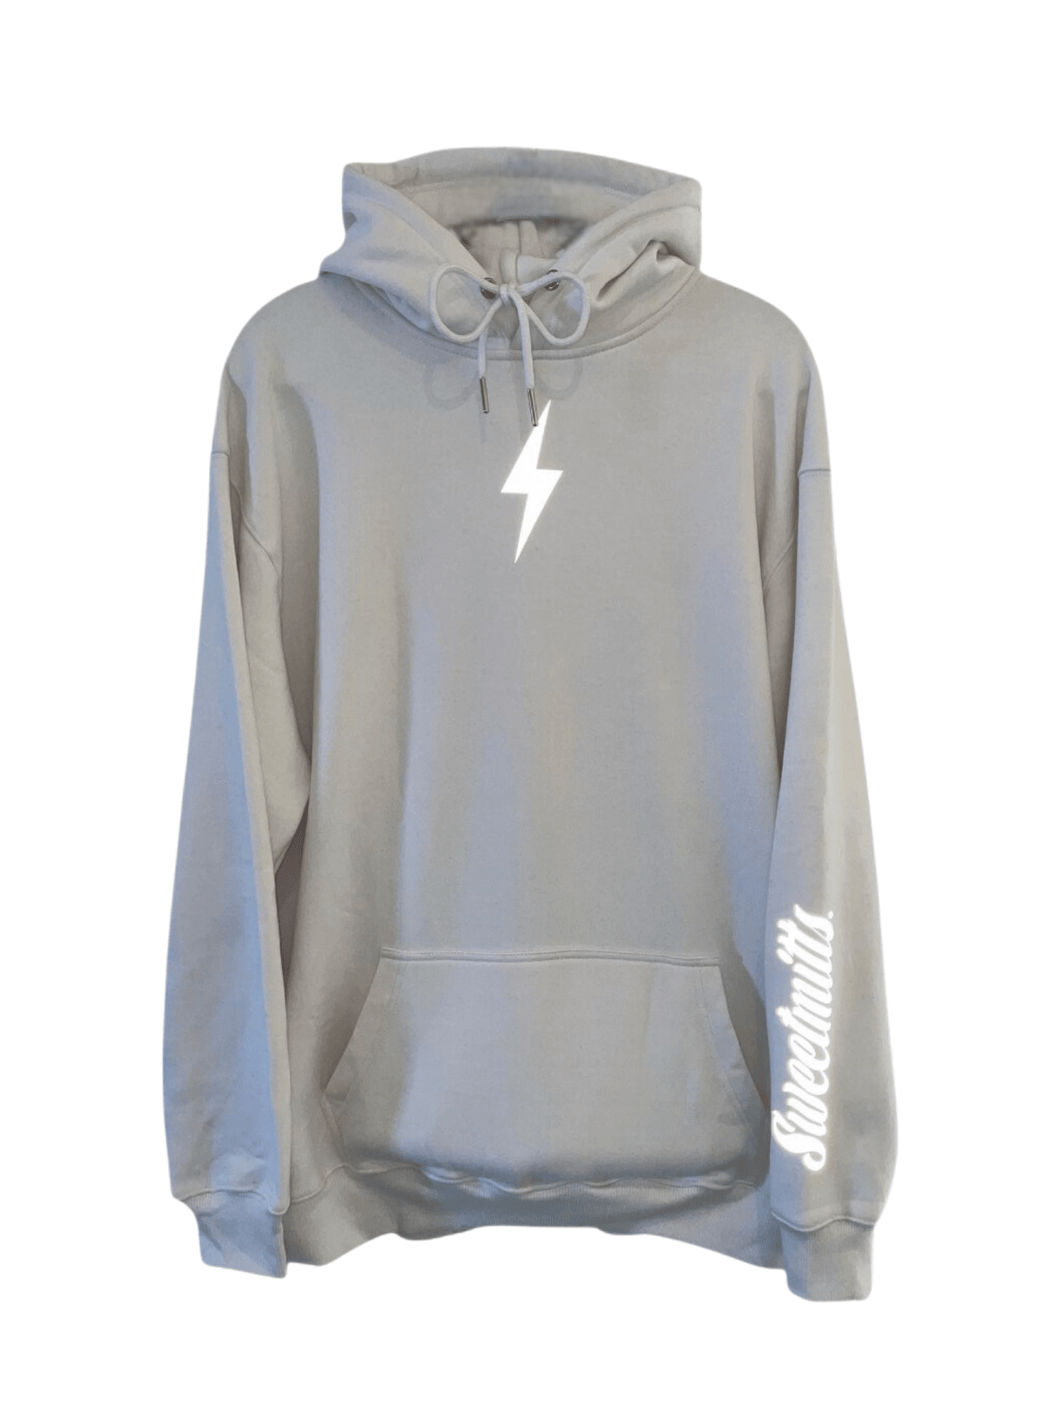 Sweetmitts White Reflective Strike Hoodie Front | Skiing and Snowboarding Hoodie